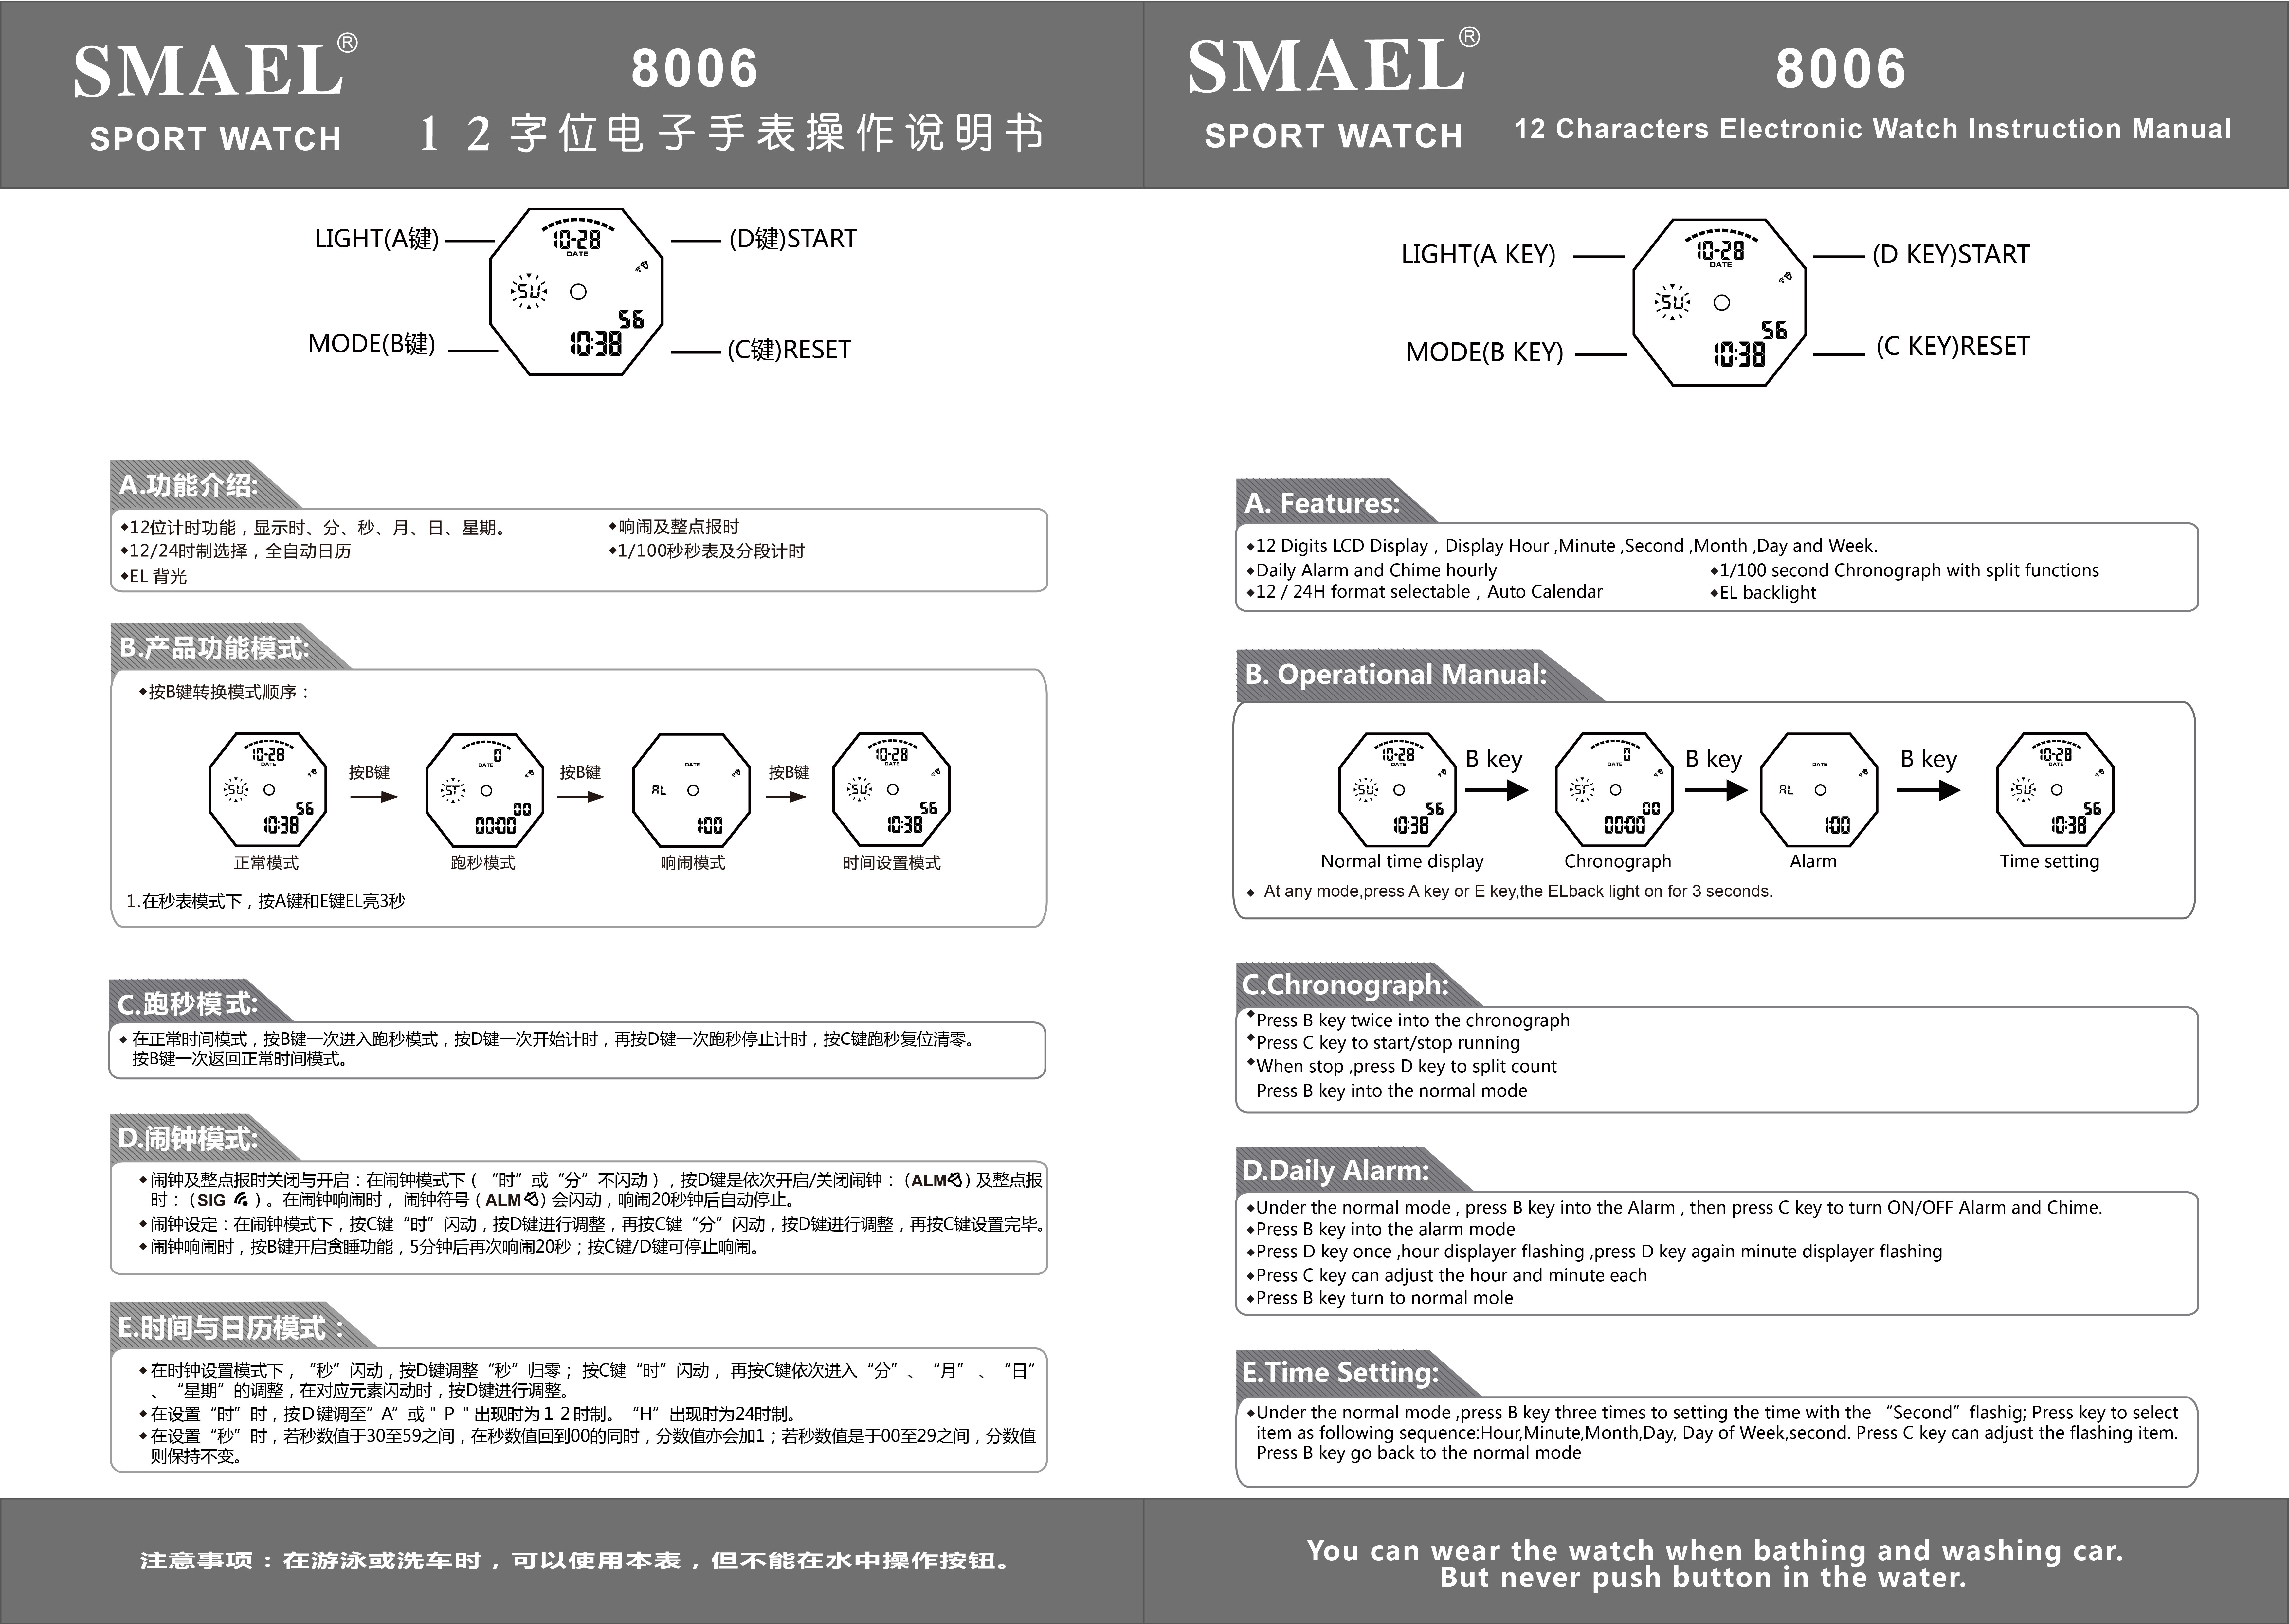 8006 instructions in English and Chinese 12